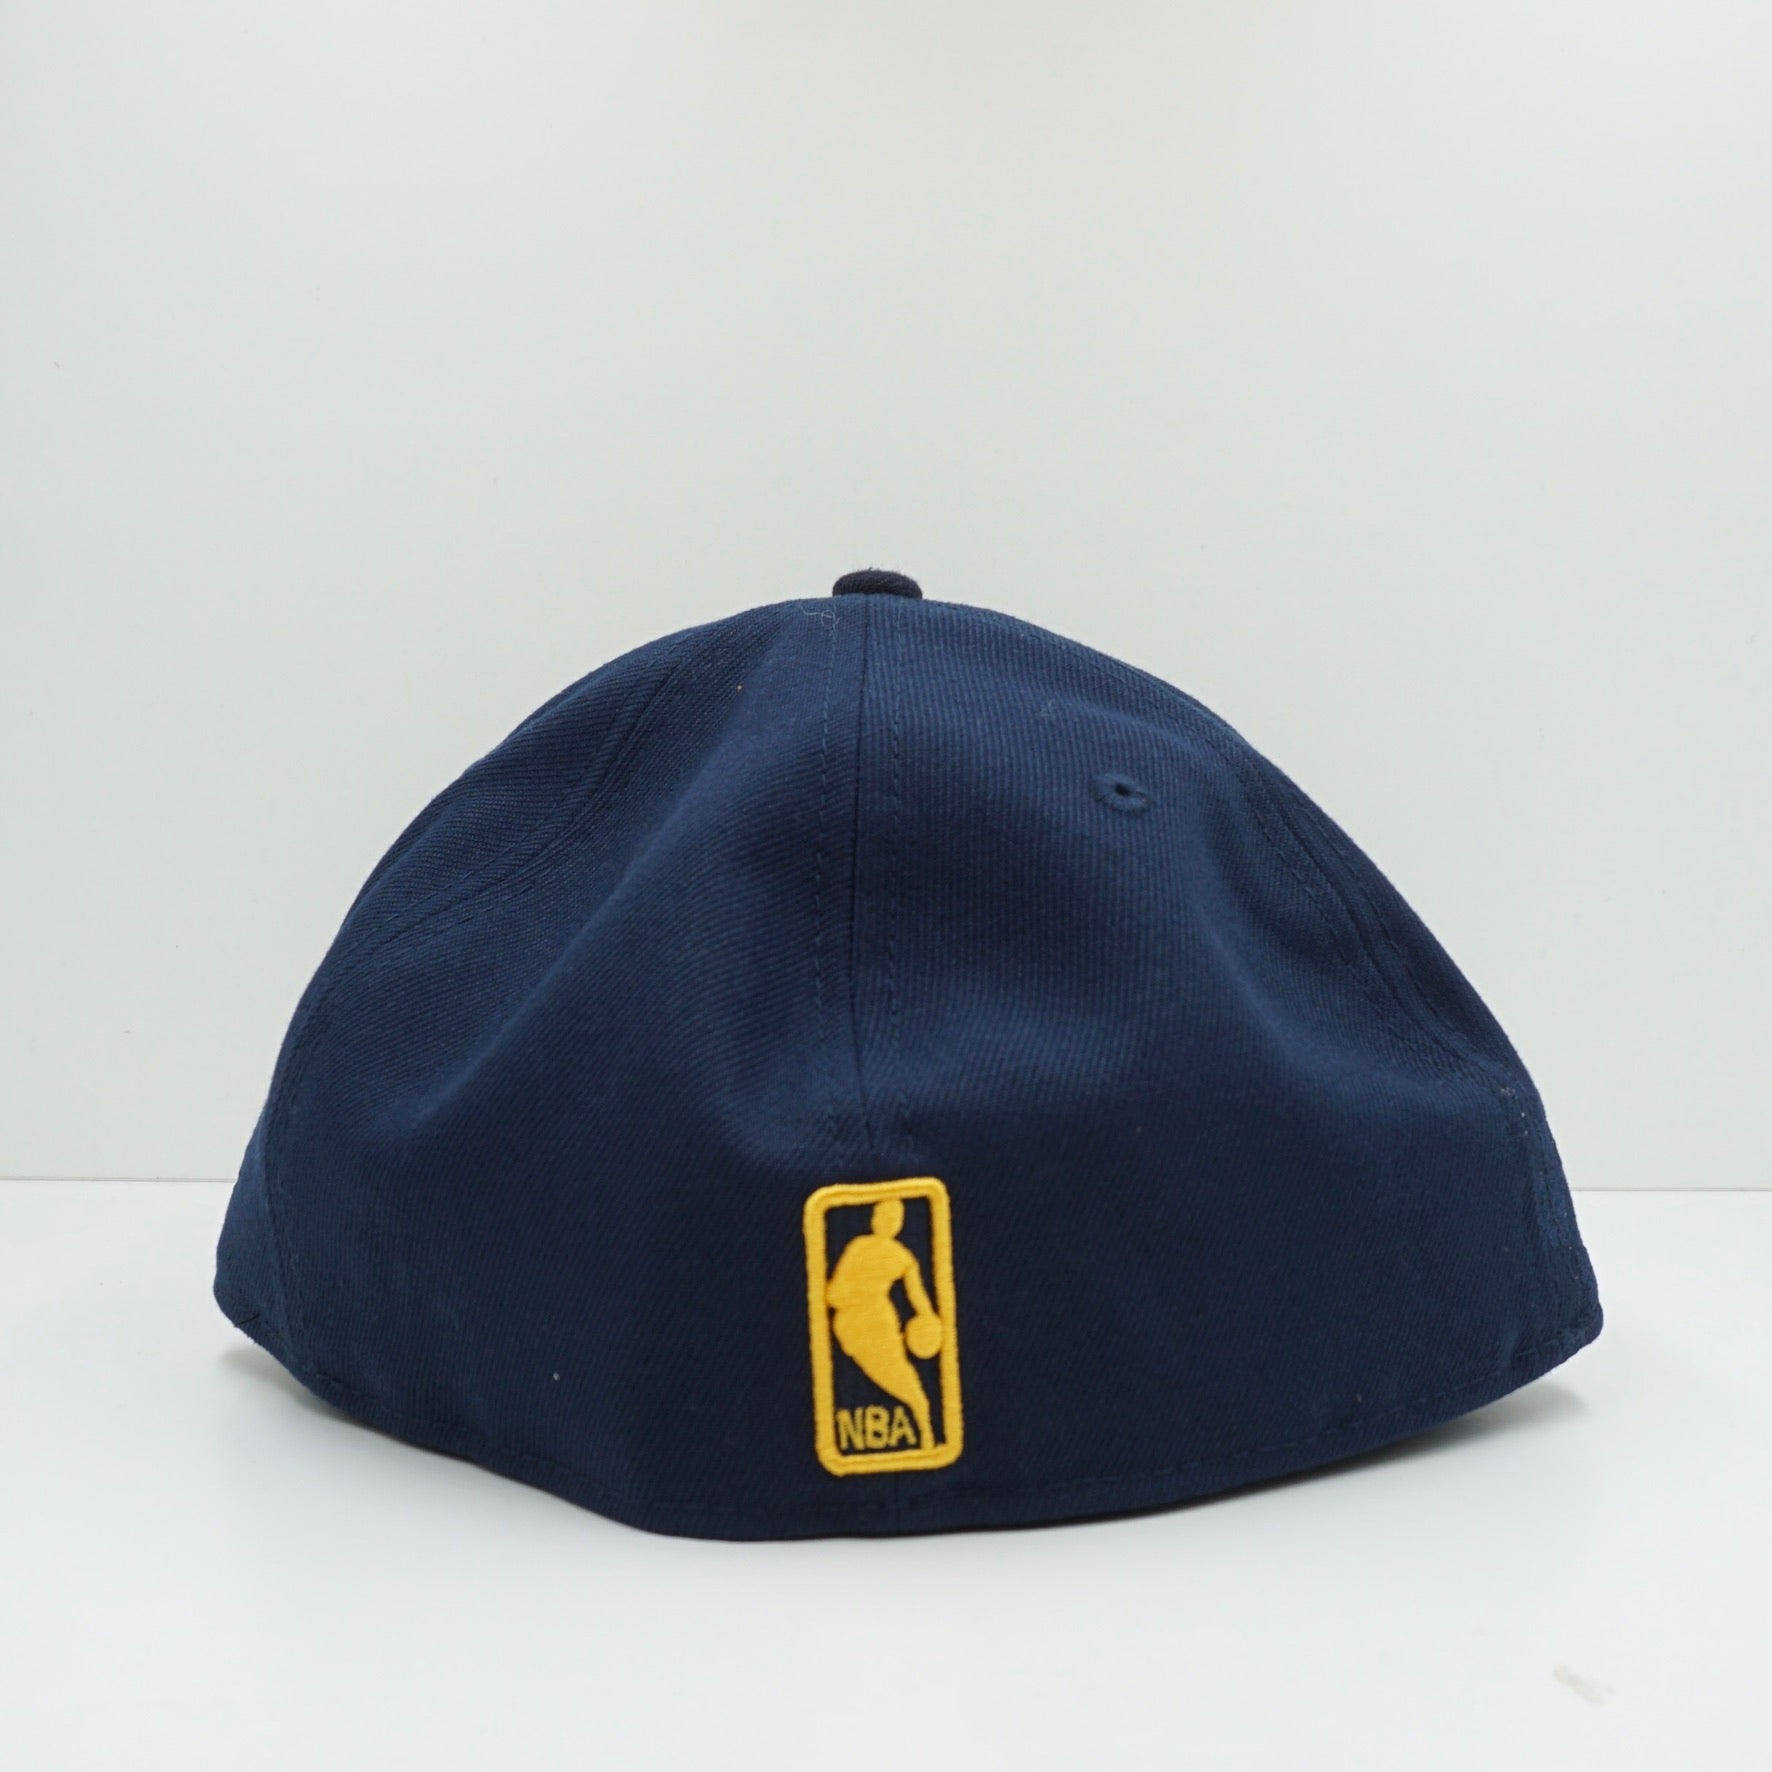 New Era Indiana Pacers Navy Fitted Cap